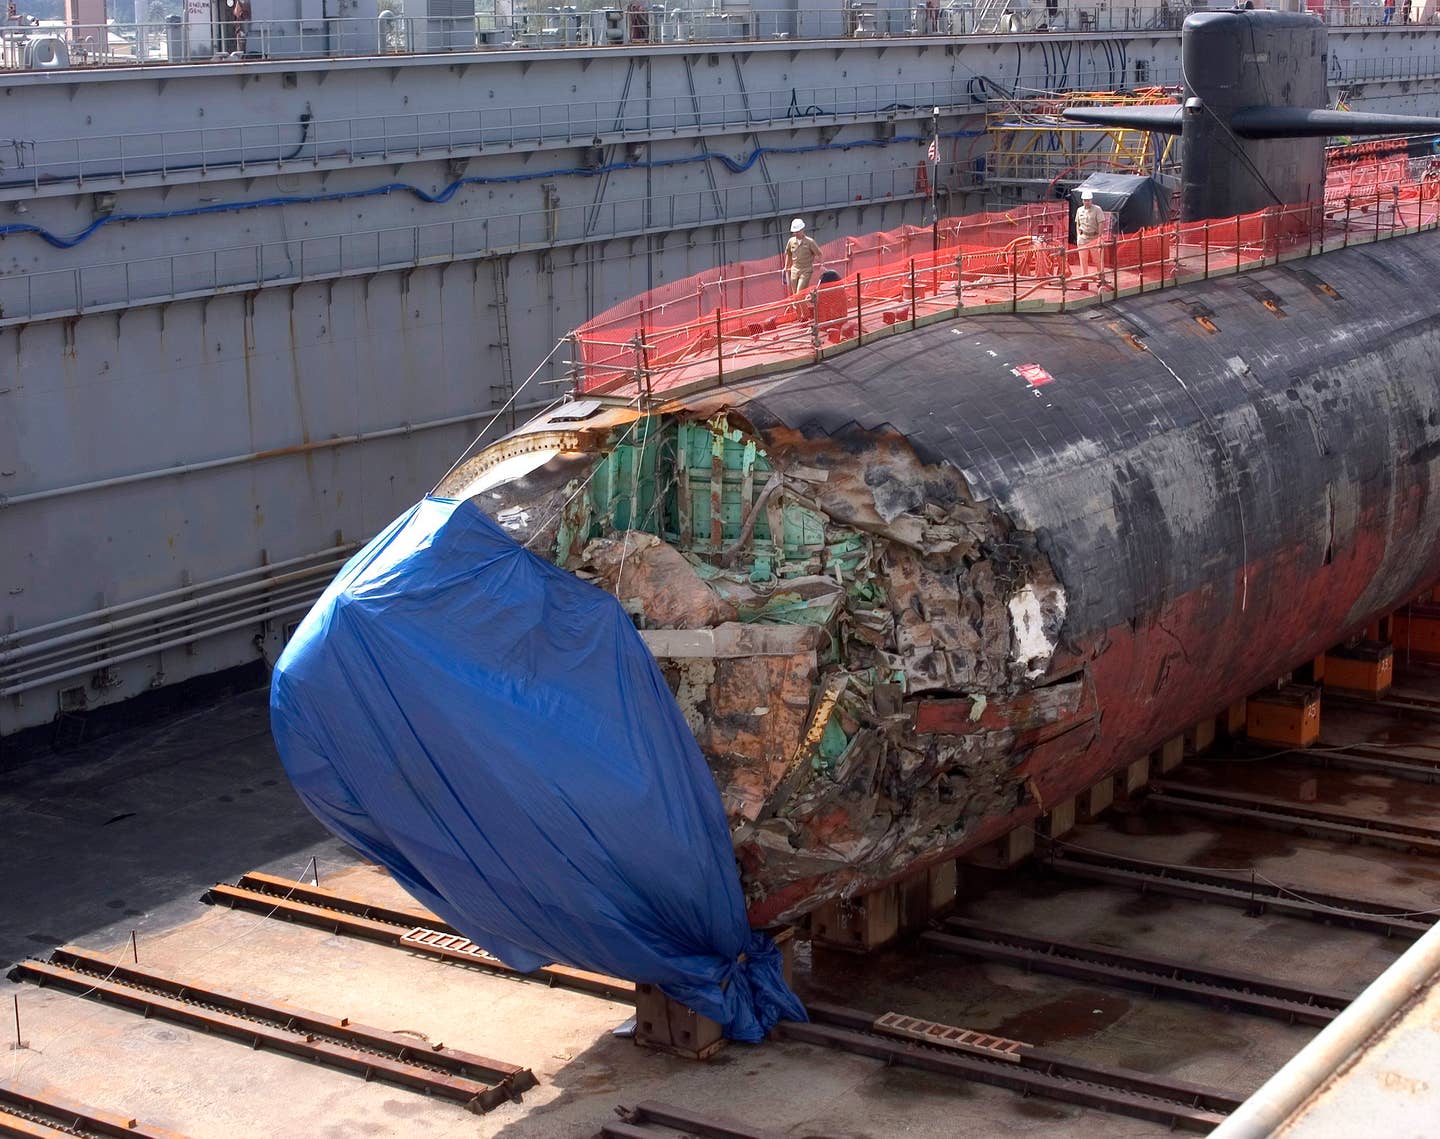 The USS San Francisco in drydock after the collision. (U.S. Navy photo by Photographer's Mate 2nd Class Mark Allen Leonesio)